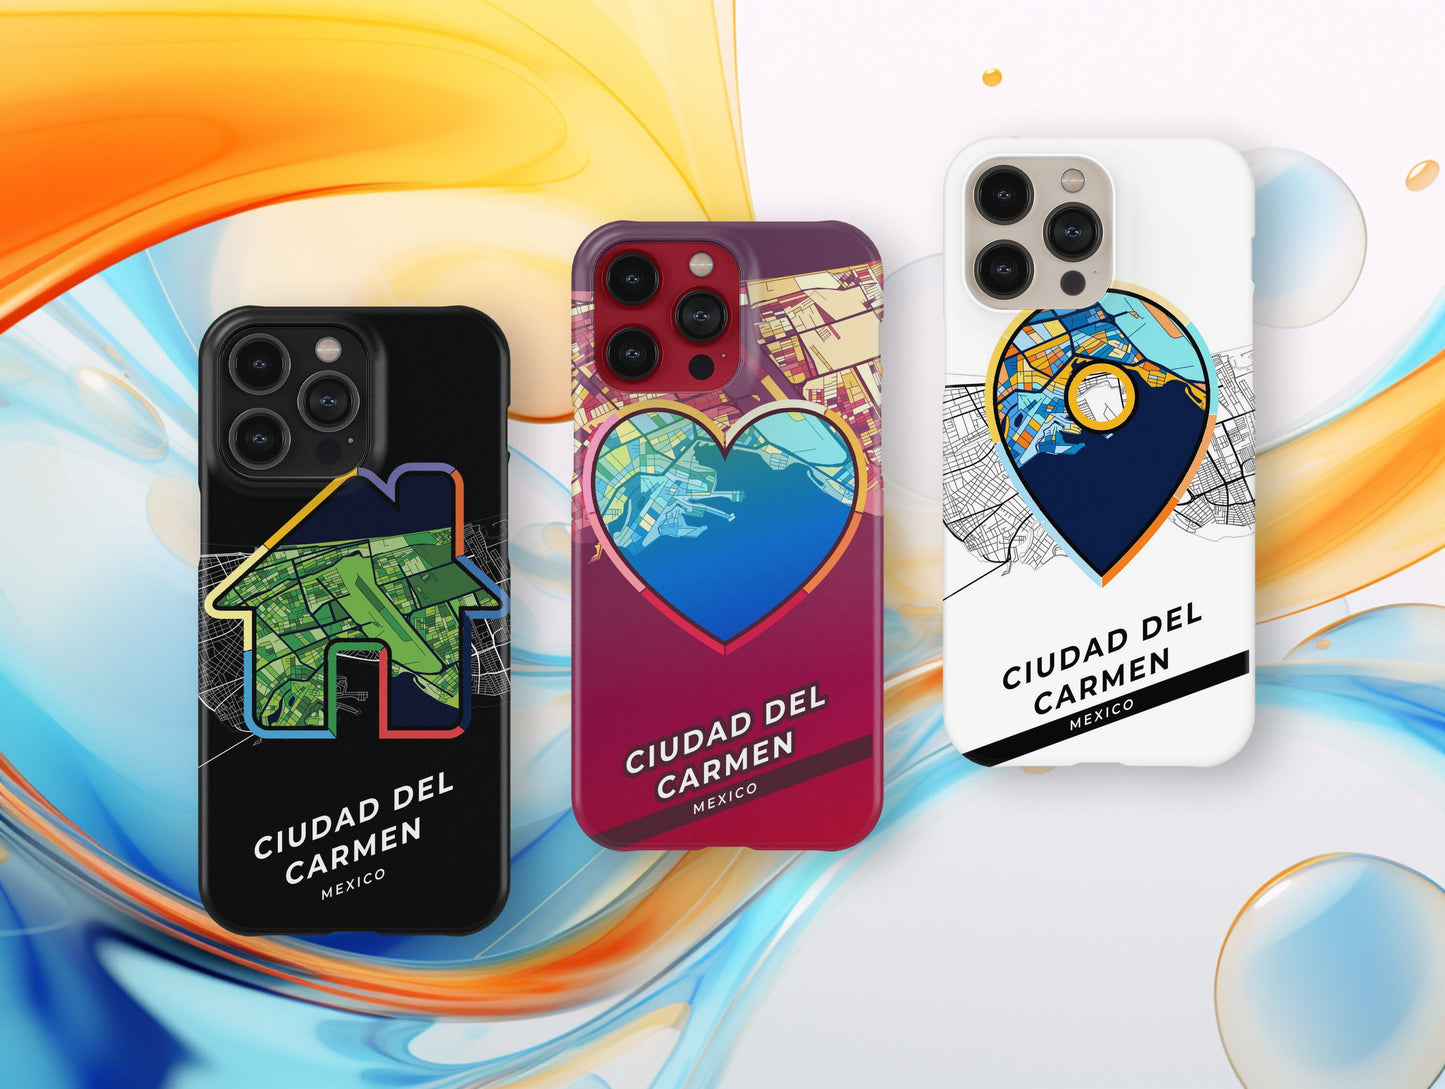 Ciudad Del Carmen Mexico slim phone case with colorful icon. Birthday, wedding or housewarming gift. Couple match cases.